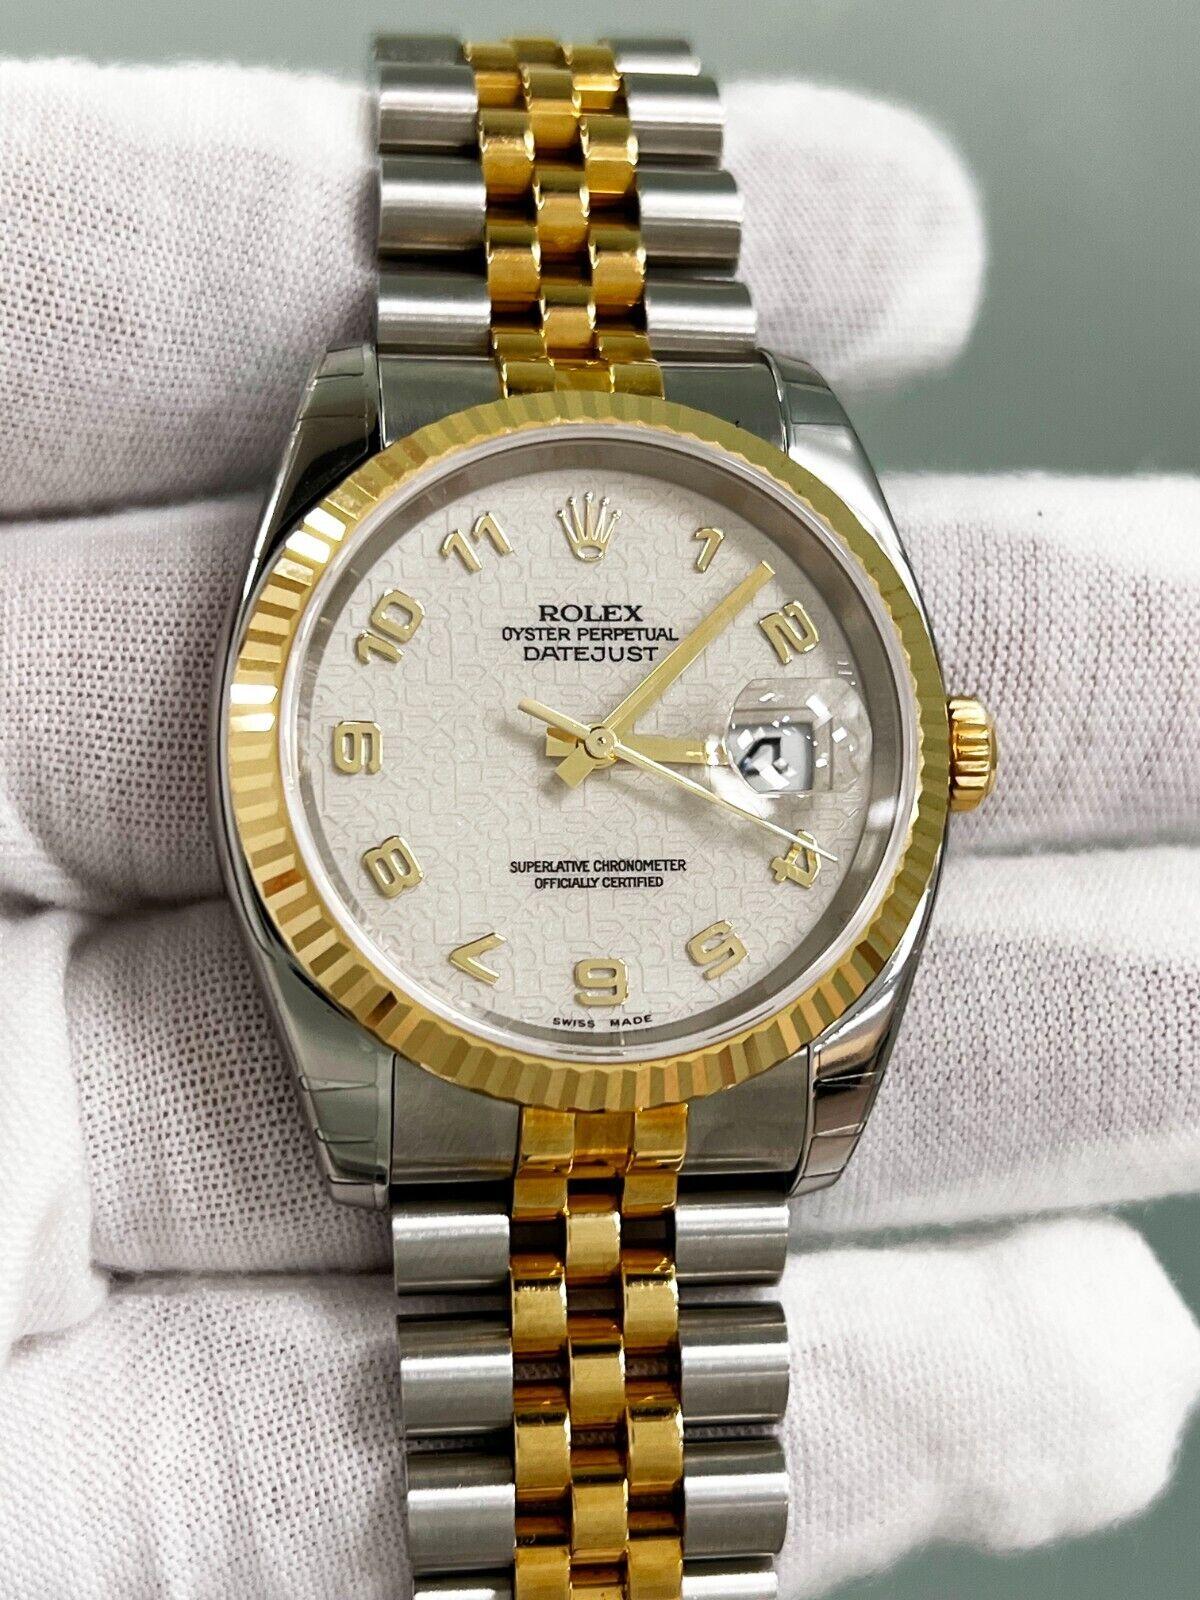 Style Number: 116233

Serial: F255***

Year: 2003
 
Model: Datejust 
 
Case Material: Stainless Steel 
 
Band: 18K Yellow Gold & Stainless Steel 
 
Bezel: 18K Yellow Gold 
 
Dial: Arabic Jubilee Dial 
 
Face: Sapphire Crystal 
 
Case Size: 36mm 
